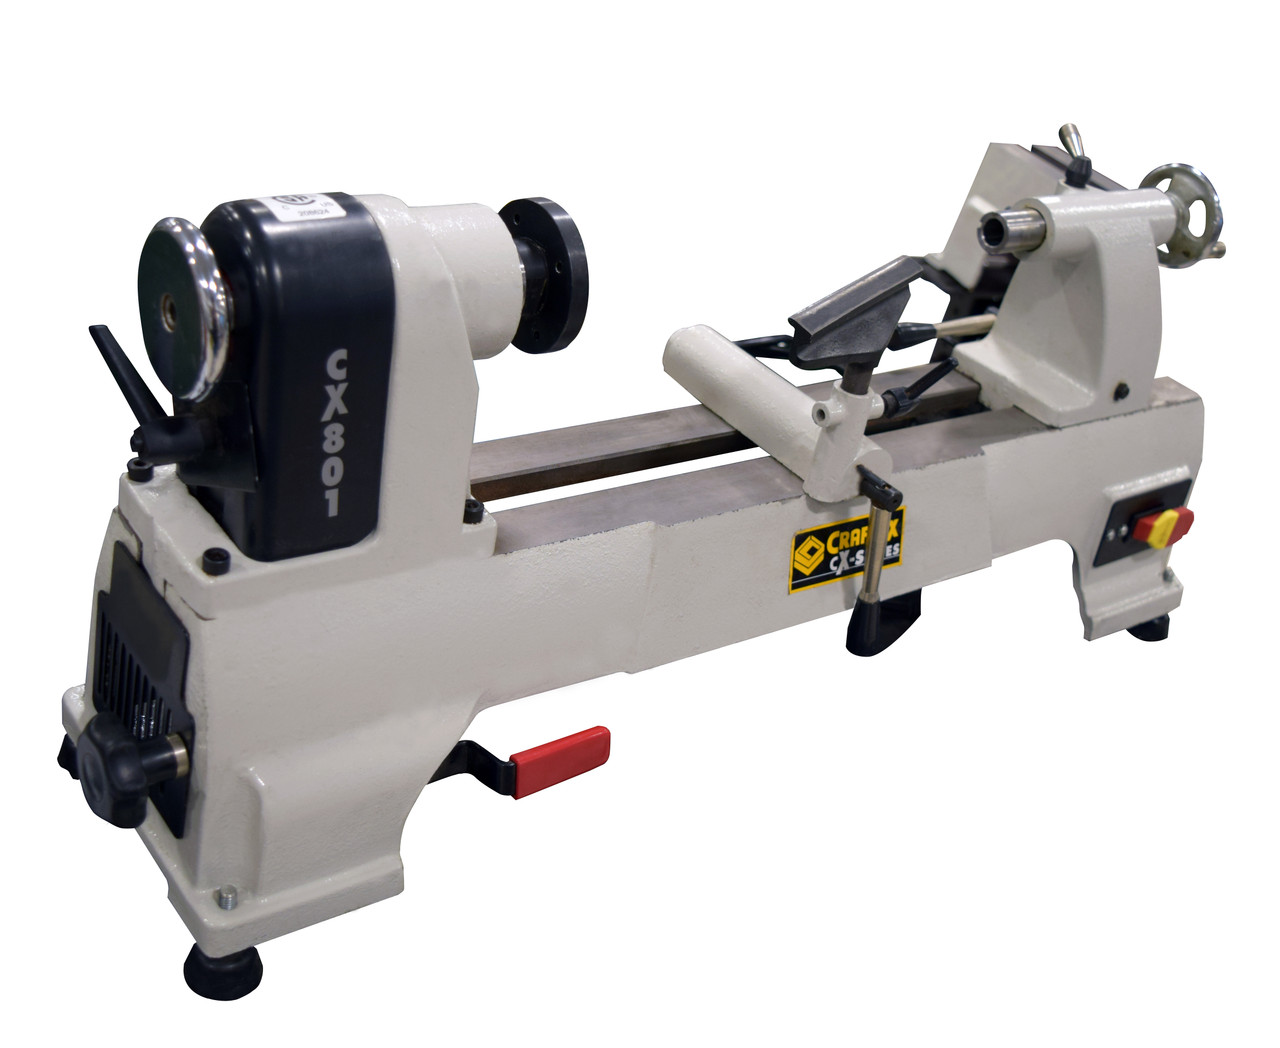 Buy Wood Lathe Bench Top Craftex Csa at Busy Bee Tools